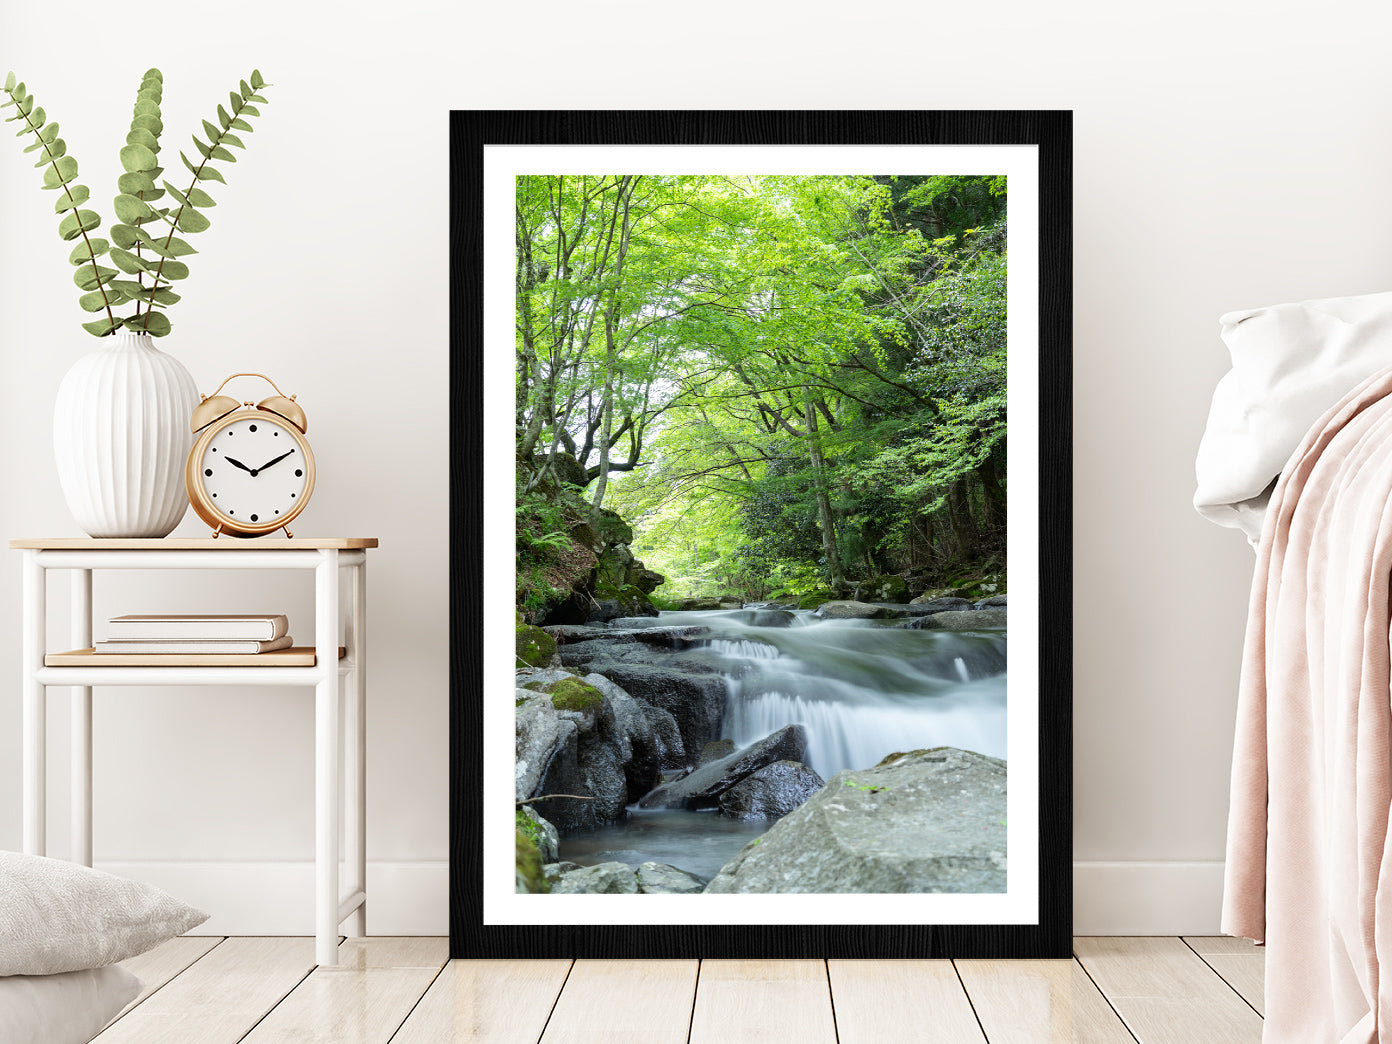 Rocky Riverside With Forest Glass Framed Wall Art, Ready to Hang Quality Print With White Border Black